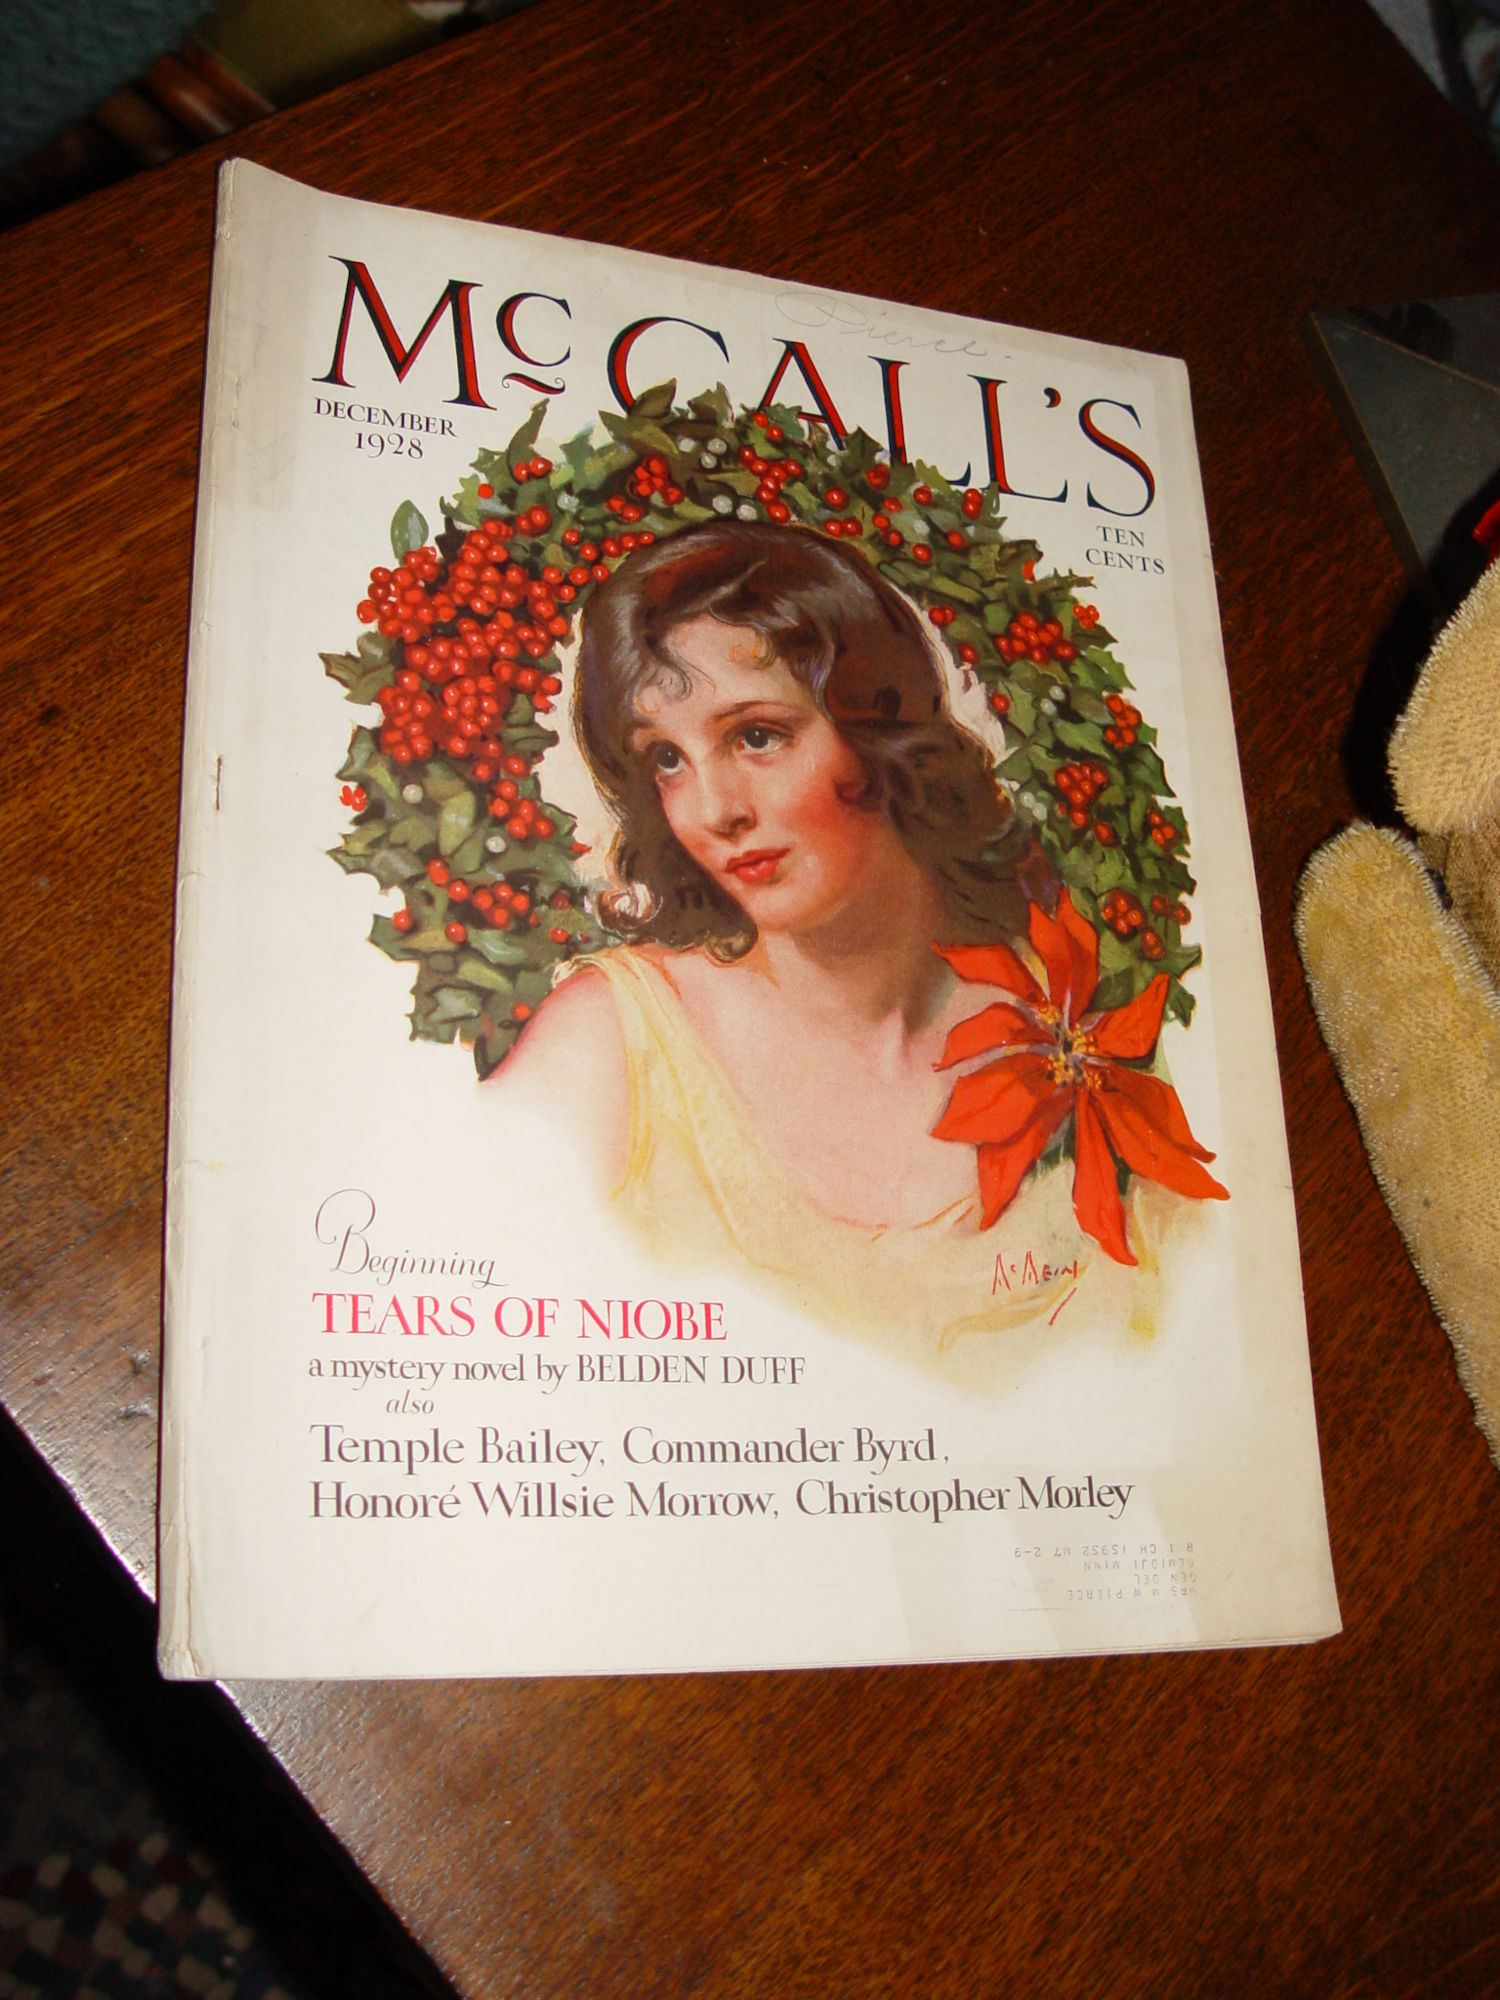 McCall’s December 1928 Christmas Issue -
                        Complete Magazine Item BOC270